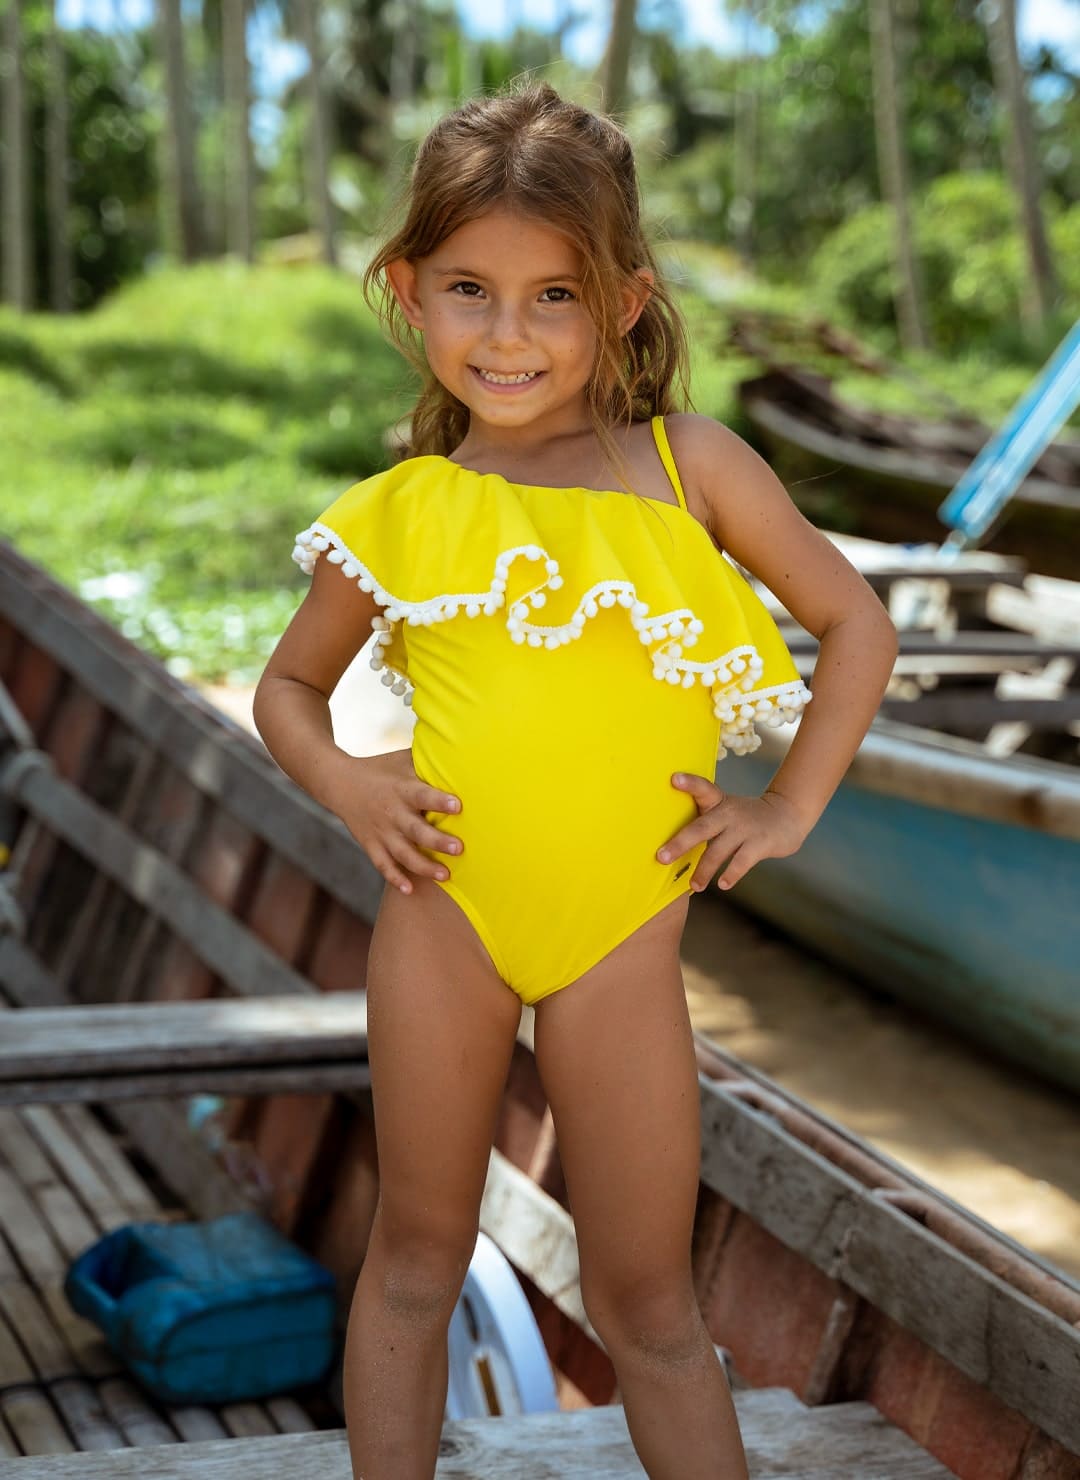 Comfort is Key in Boys' Boardshorts and Girls' One-Piece Swimsuits | Kidswear Boys | Caha Capo